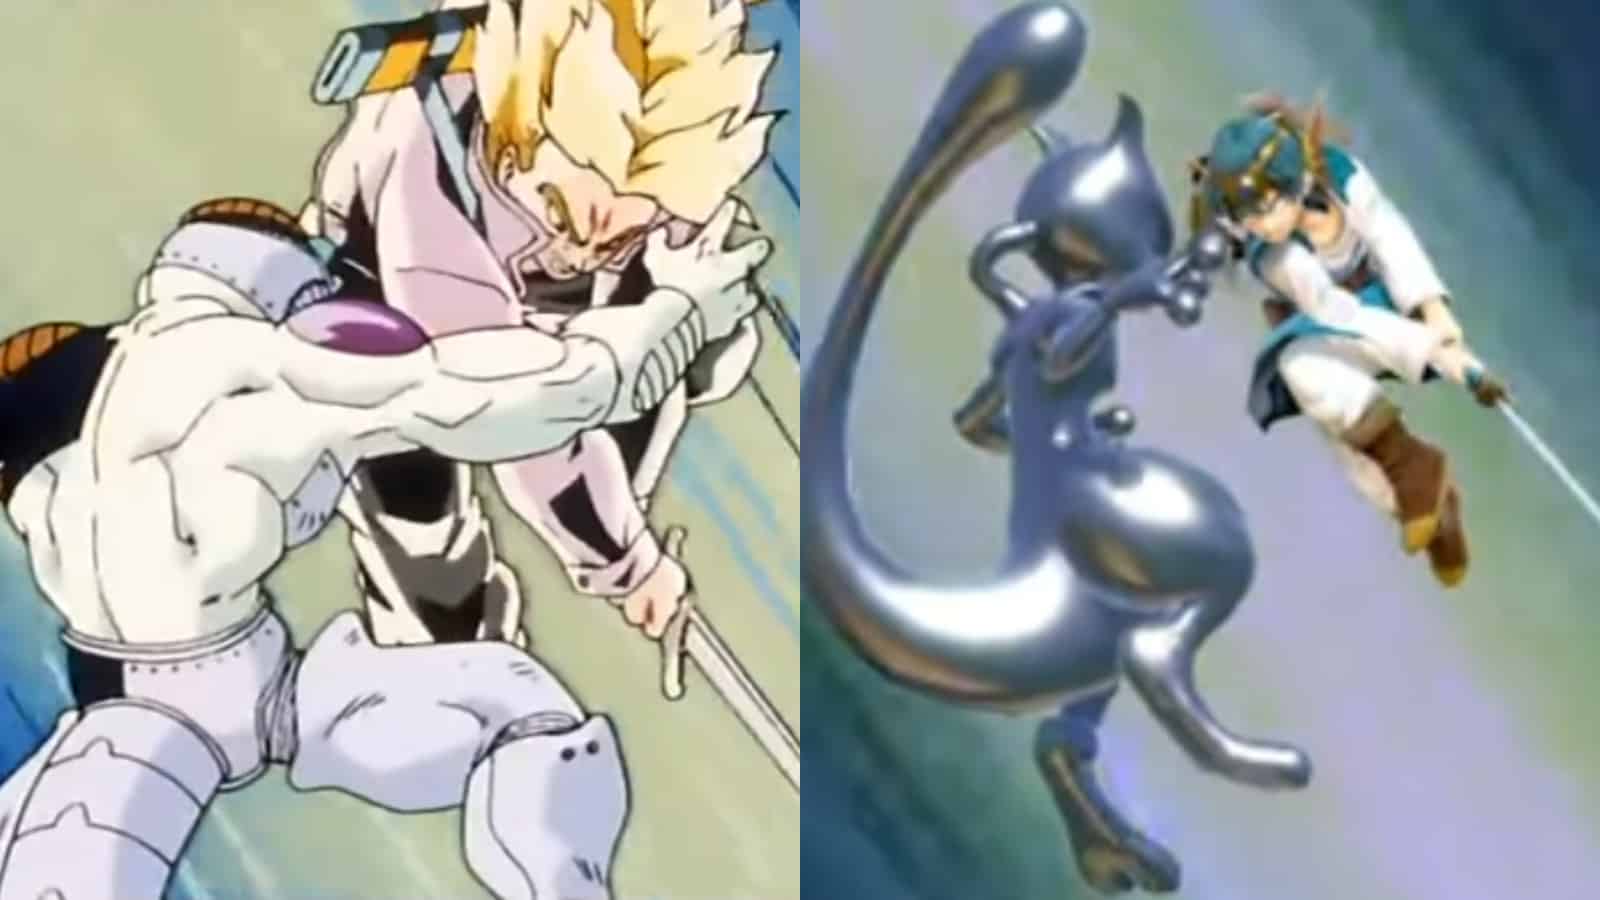 Frieza cut in half in DBZ and Smash Ultimate